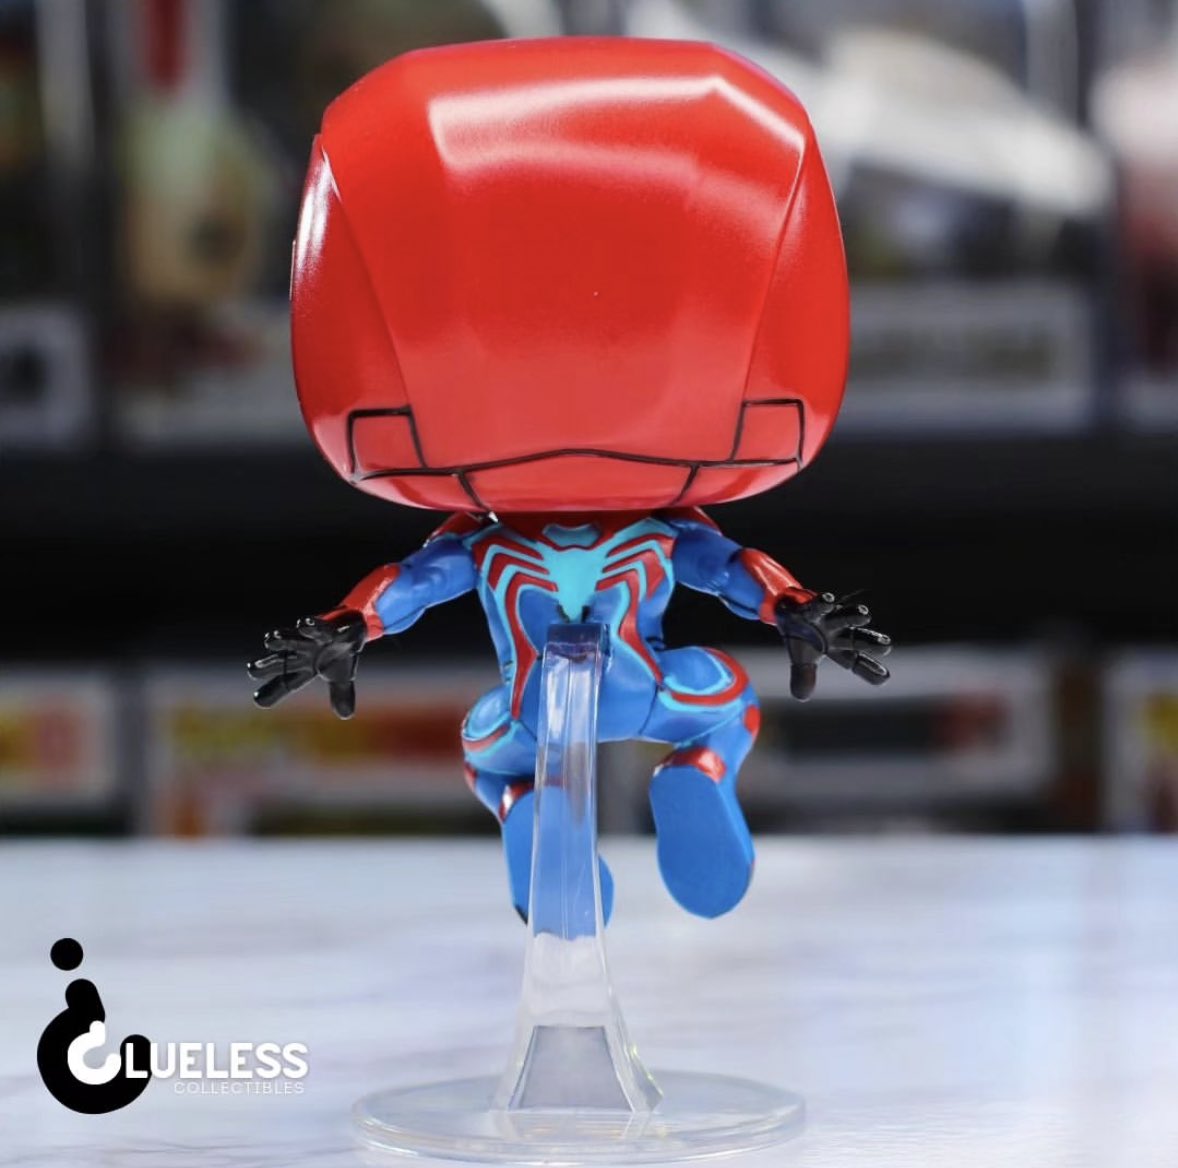 Now arriving! The EE exclusive Velocity Suit Spider-Man Funko POP! Thanks @clueless.collectibles ~ #SpiderMan #SpiderMan2 #FPN #FunkoPOPNews #Funko #POP #POPVinyl #FunkoPOP #FunkoSoda